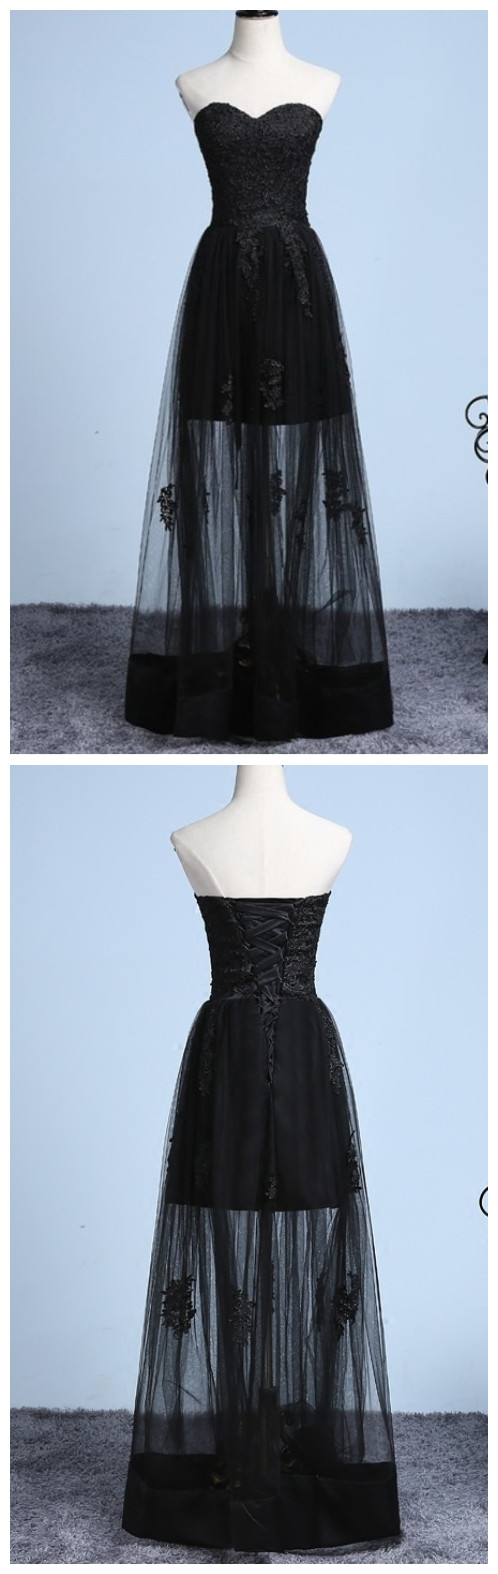 The Sexy Black Lace Prom Gowns ,long Wedding Dress, Youth Eight Series Prom Party ,evening Gown In A Graduation Gown